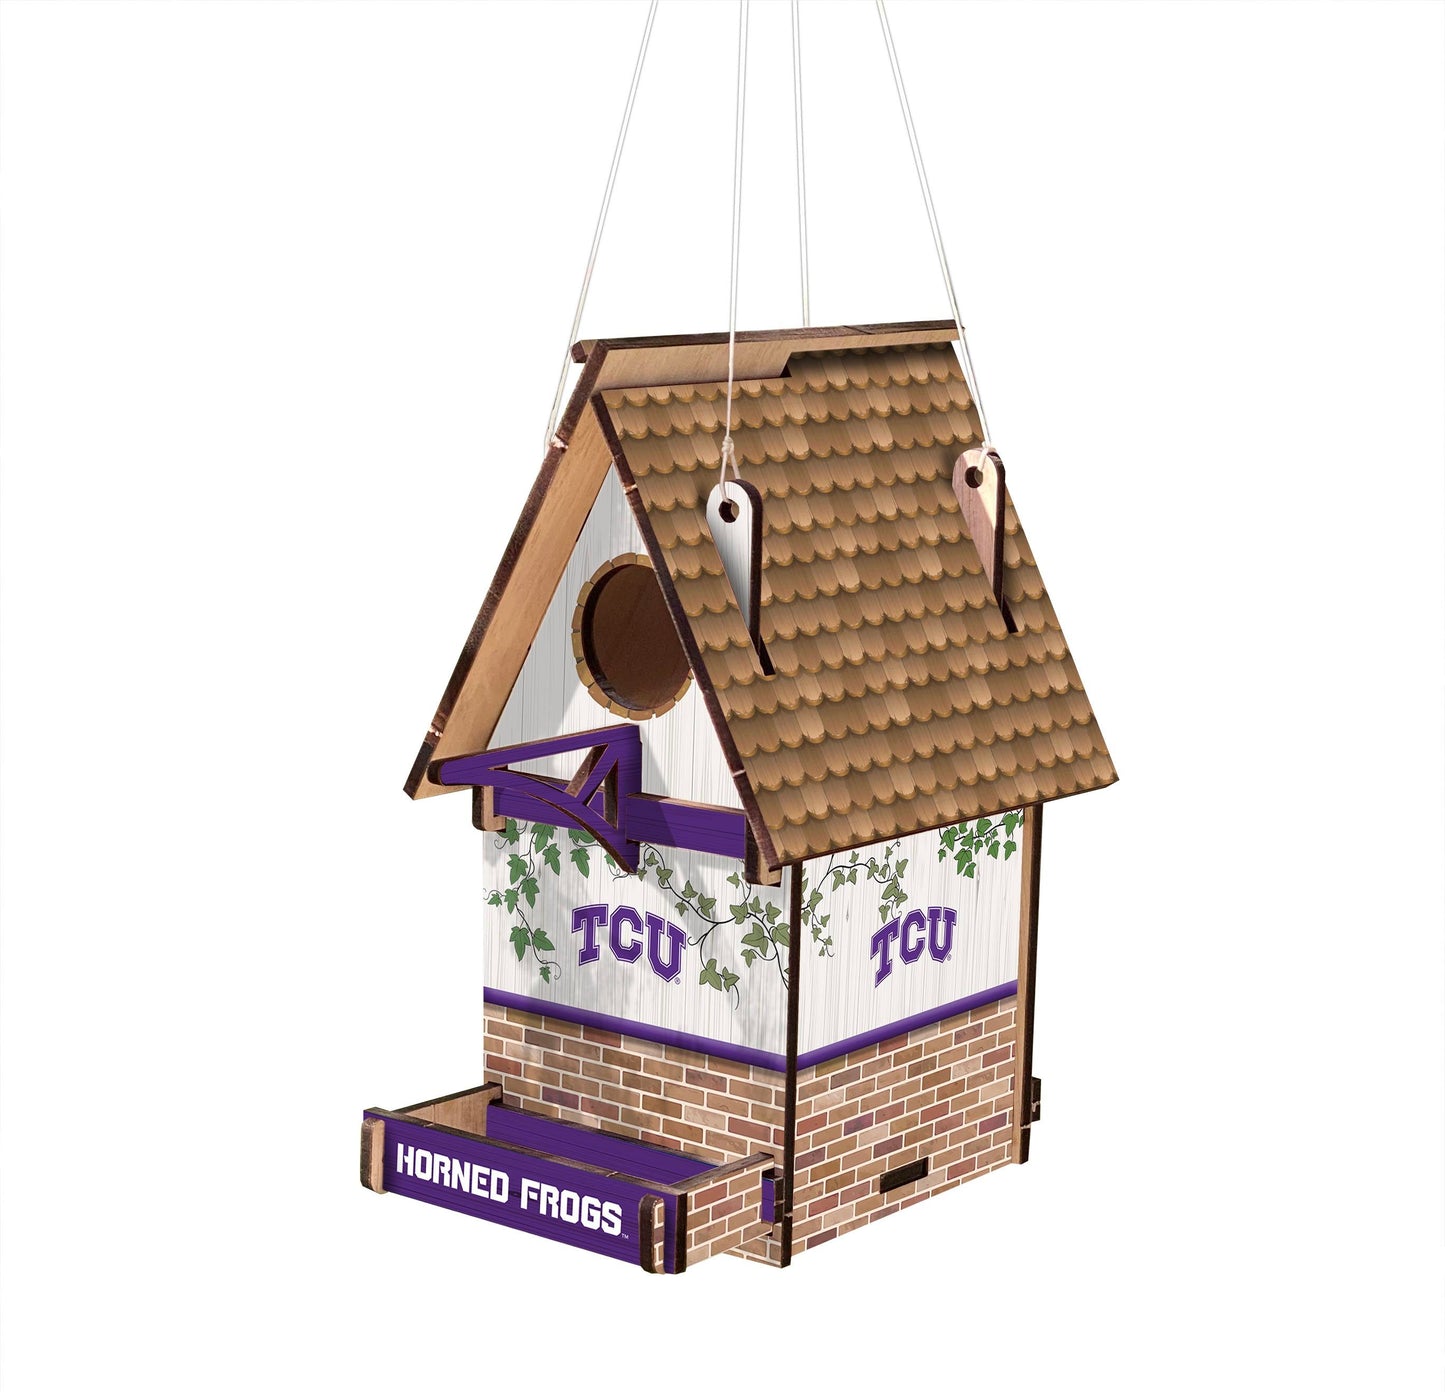 Show your love of TCU and birds with this officially licensed Texas Christian Horned Frogs birdhouse. Constructed from MDF, it features bold team graphics and colors.